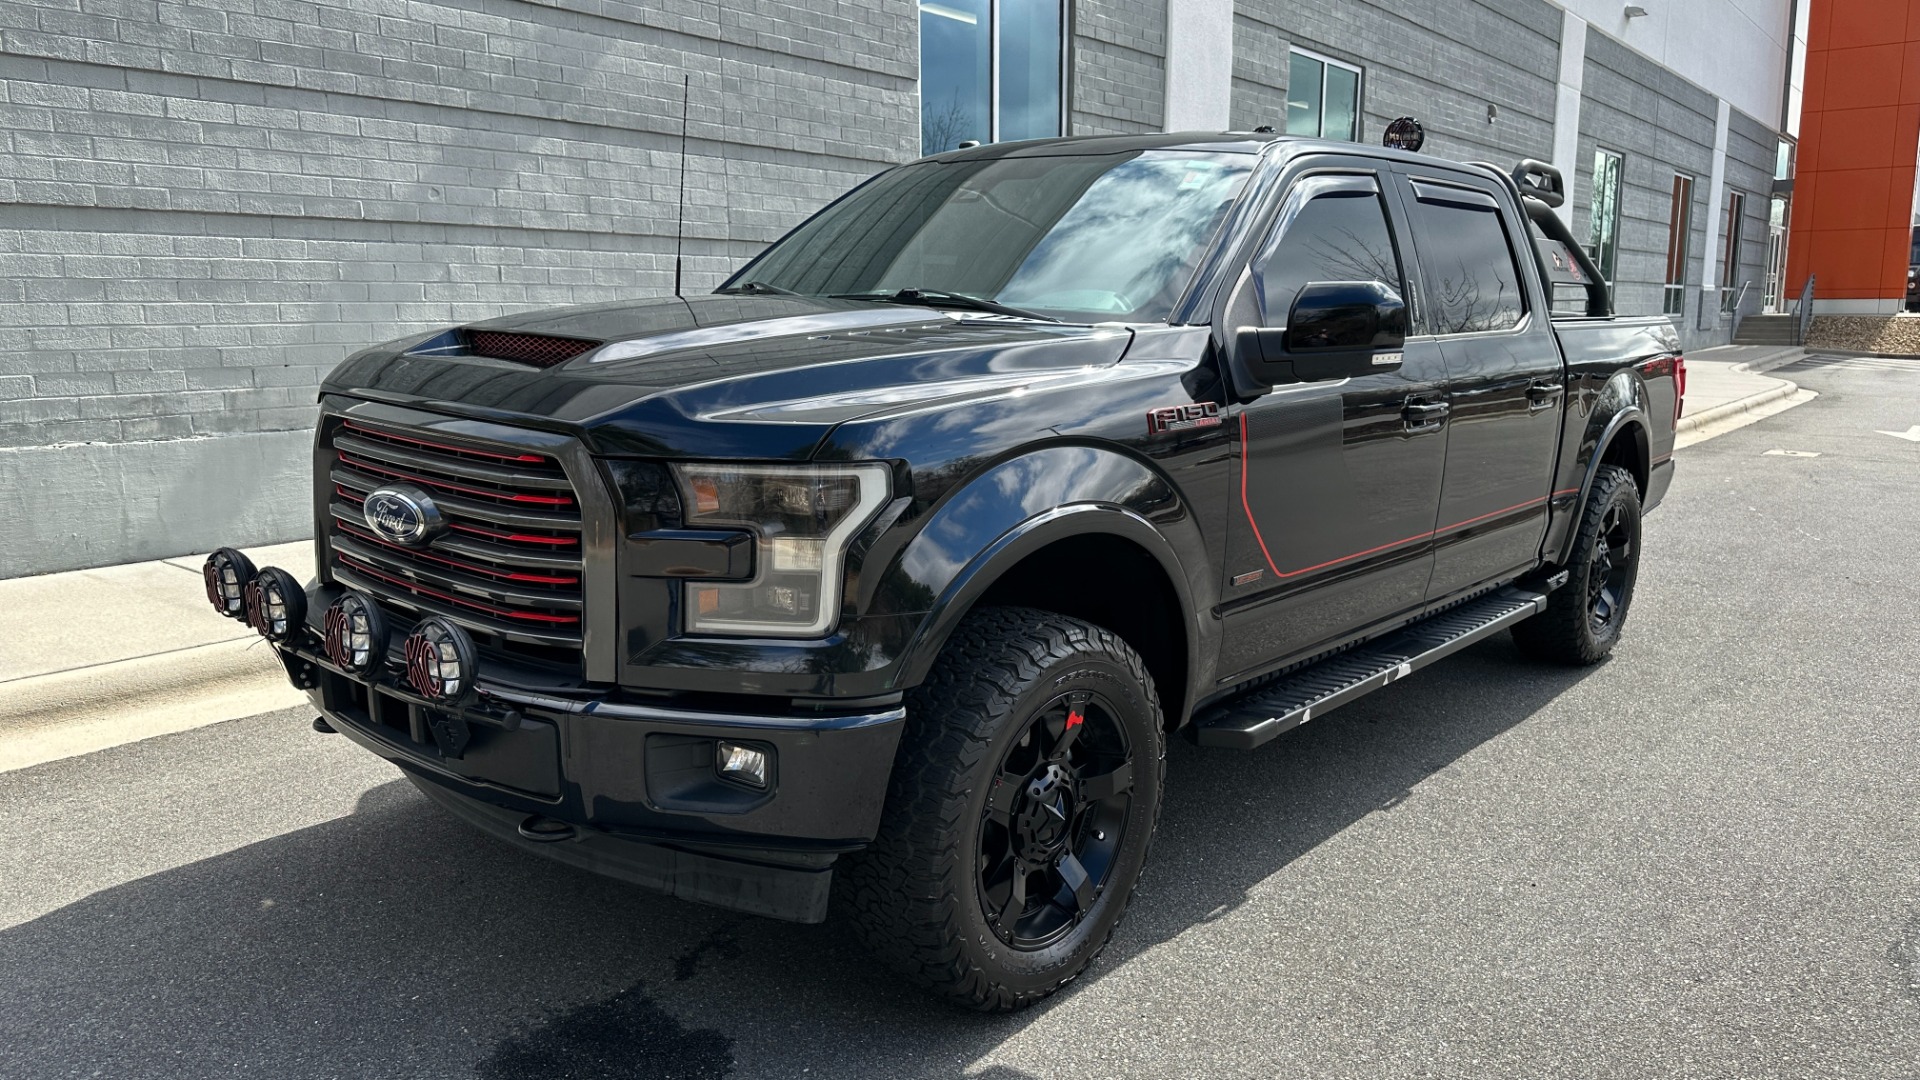 Used 2017 Ford F-150 LARIAT / SPORT EDITION / 4X4 / CREW CAB / UPGRADED WHEELS / BUMPERS / LIGHT for sale Sold at Formula Imports in Charlotte NC 28227 2